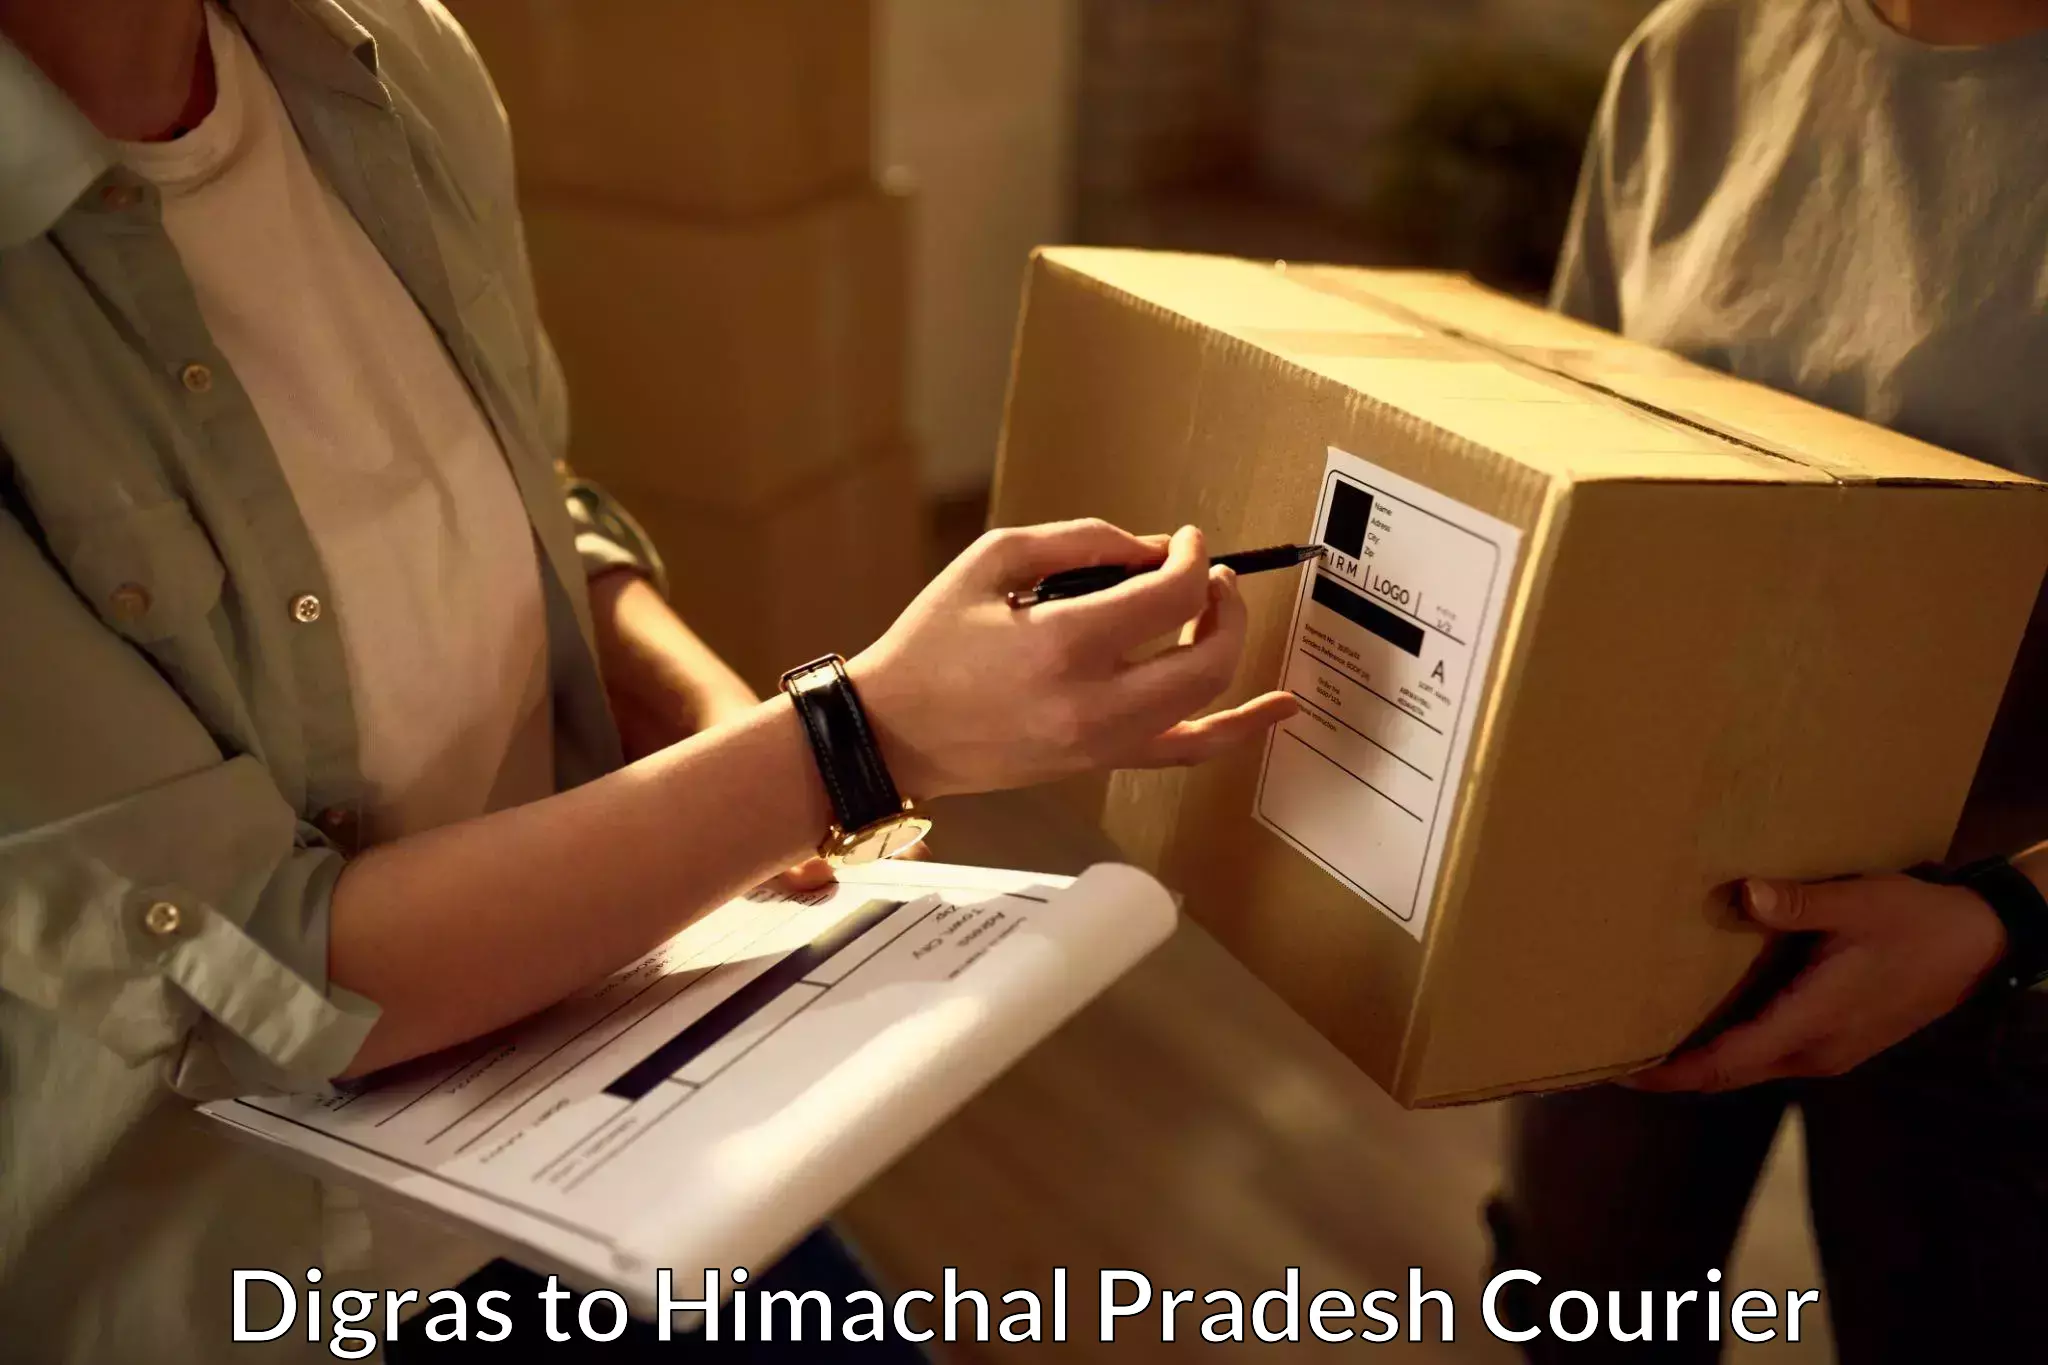 Pharmaceutical courier Digras to Himachal Pradesh